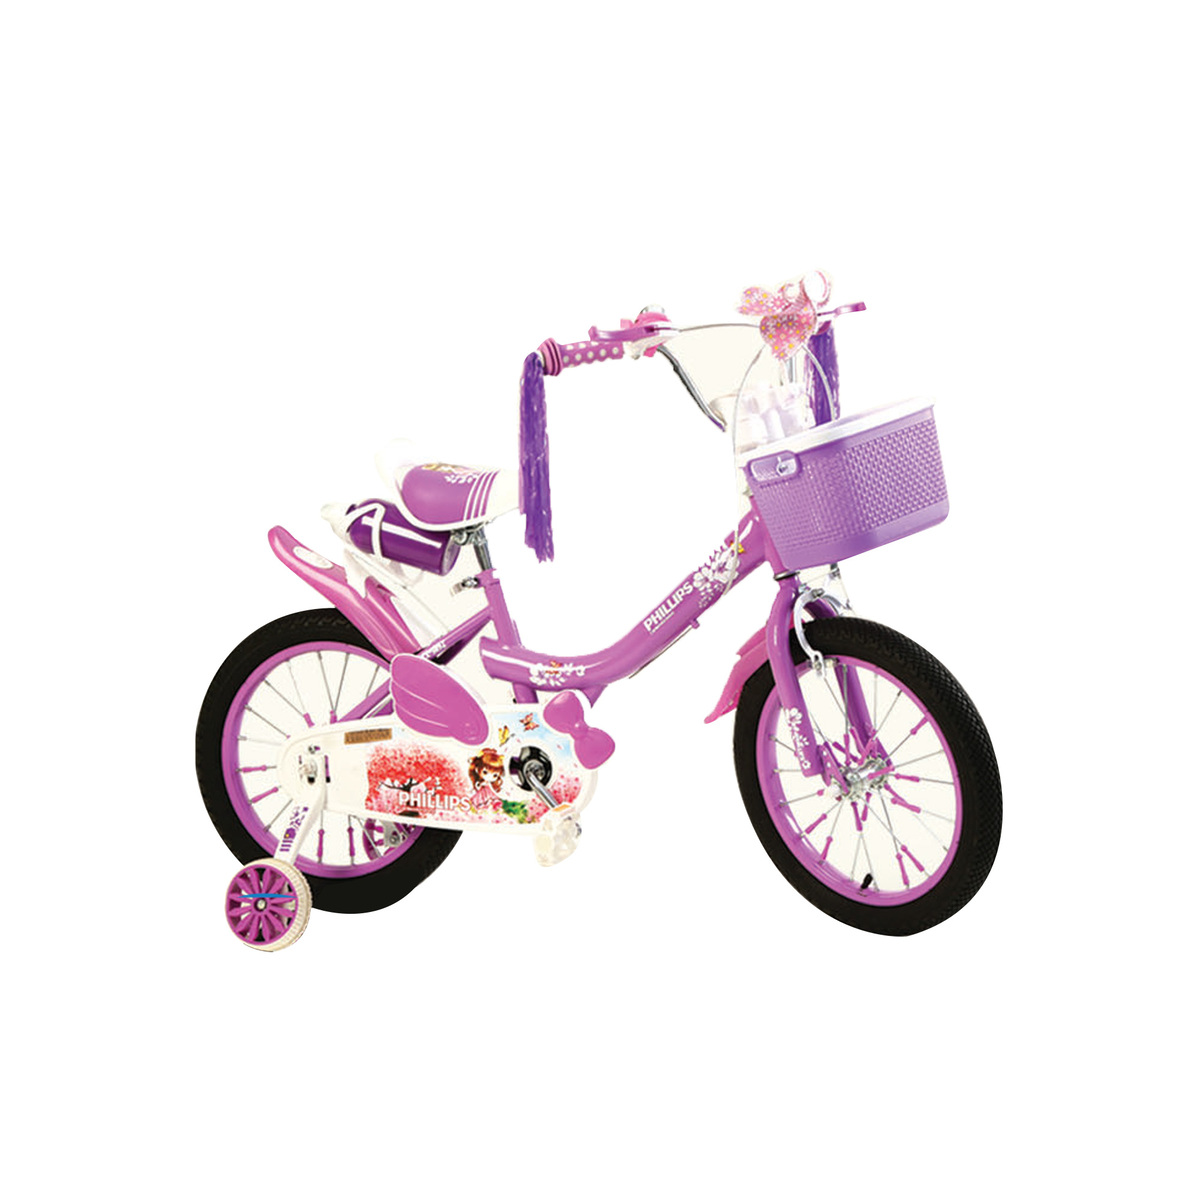 Skid Fusion Kids Bicycle 16Inch WYYD-16 Assorted Color